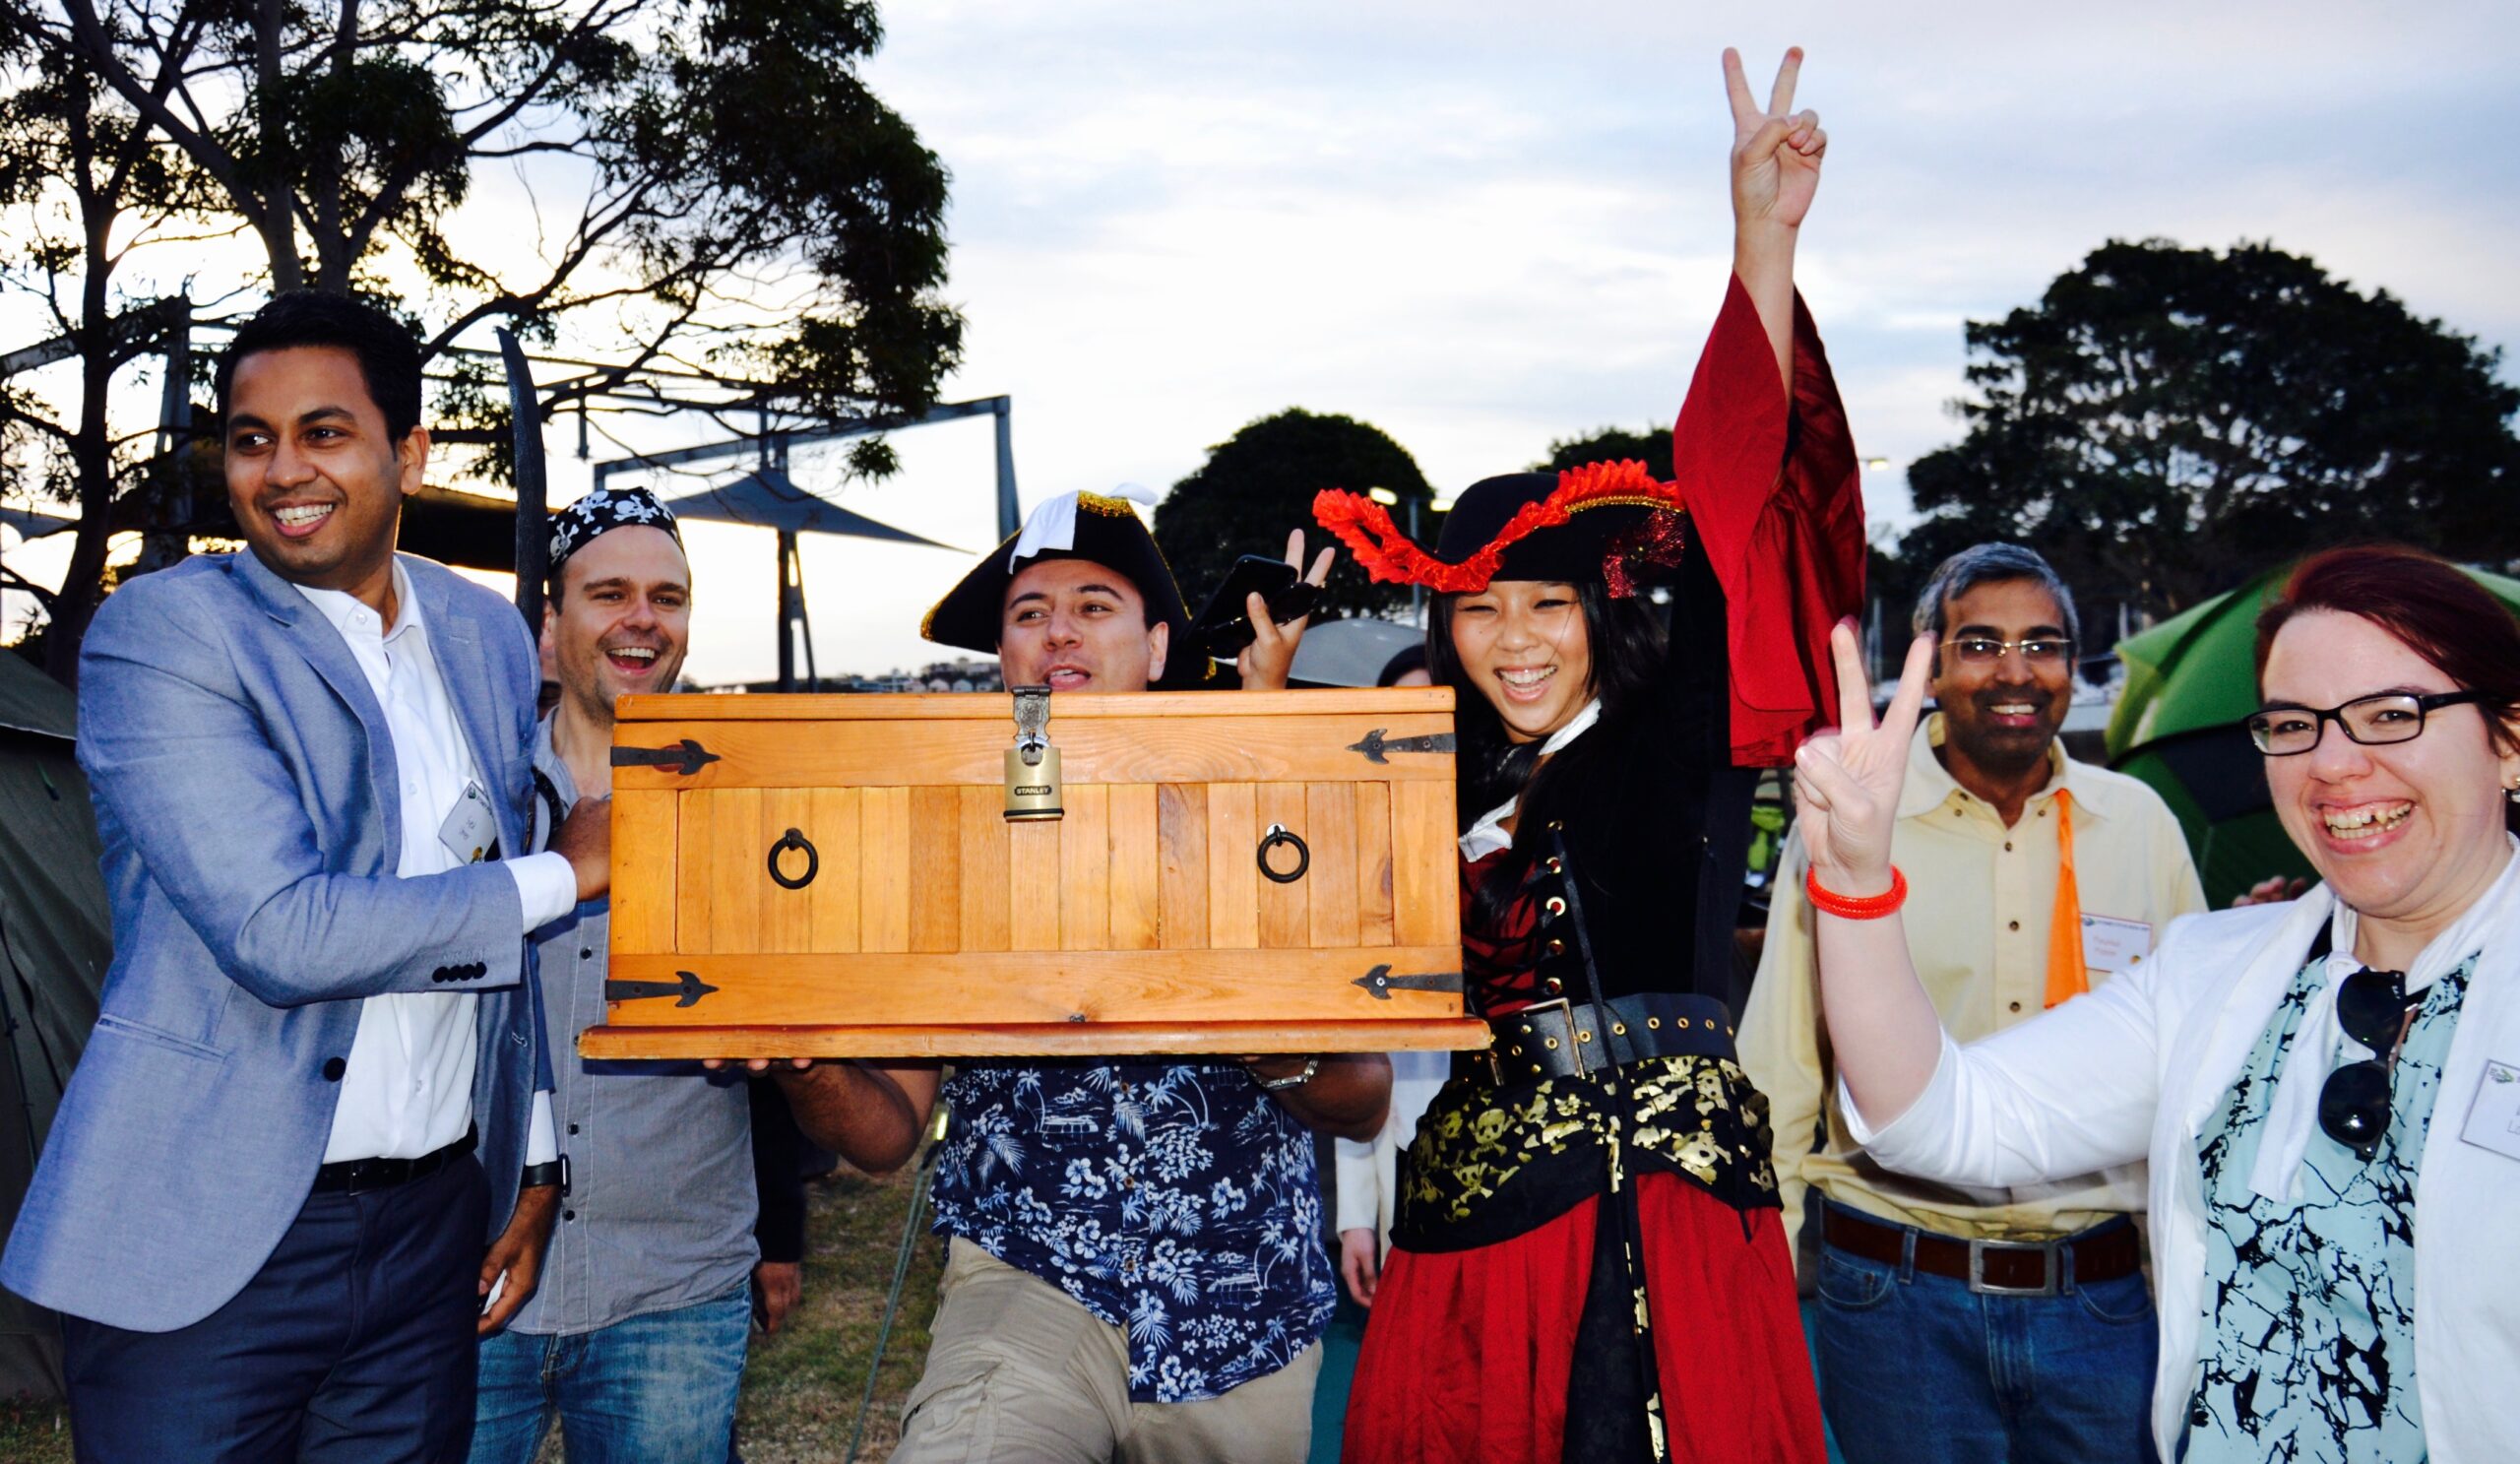 Surprise find a real Gold Coast treasure chest. Team Hunting for treasure is easy fun! Teams discover bounty on Main Beach Surfers Paradise near Sheraton Mirage, Star and QT hotels.